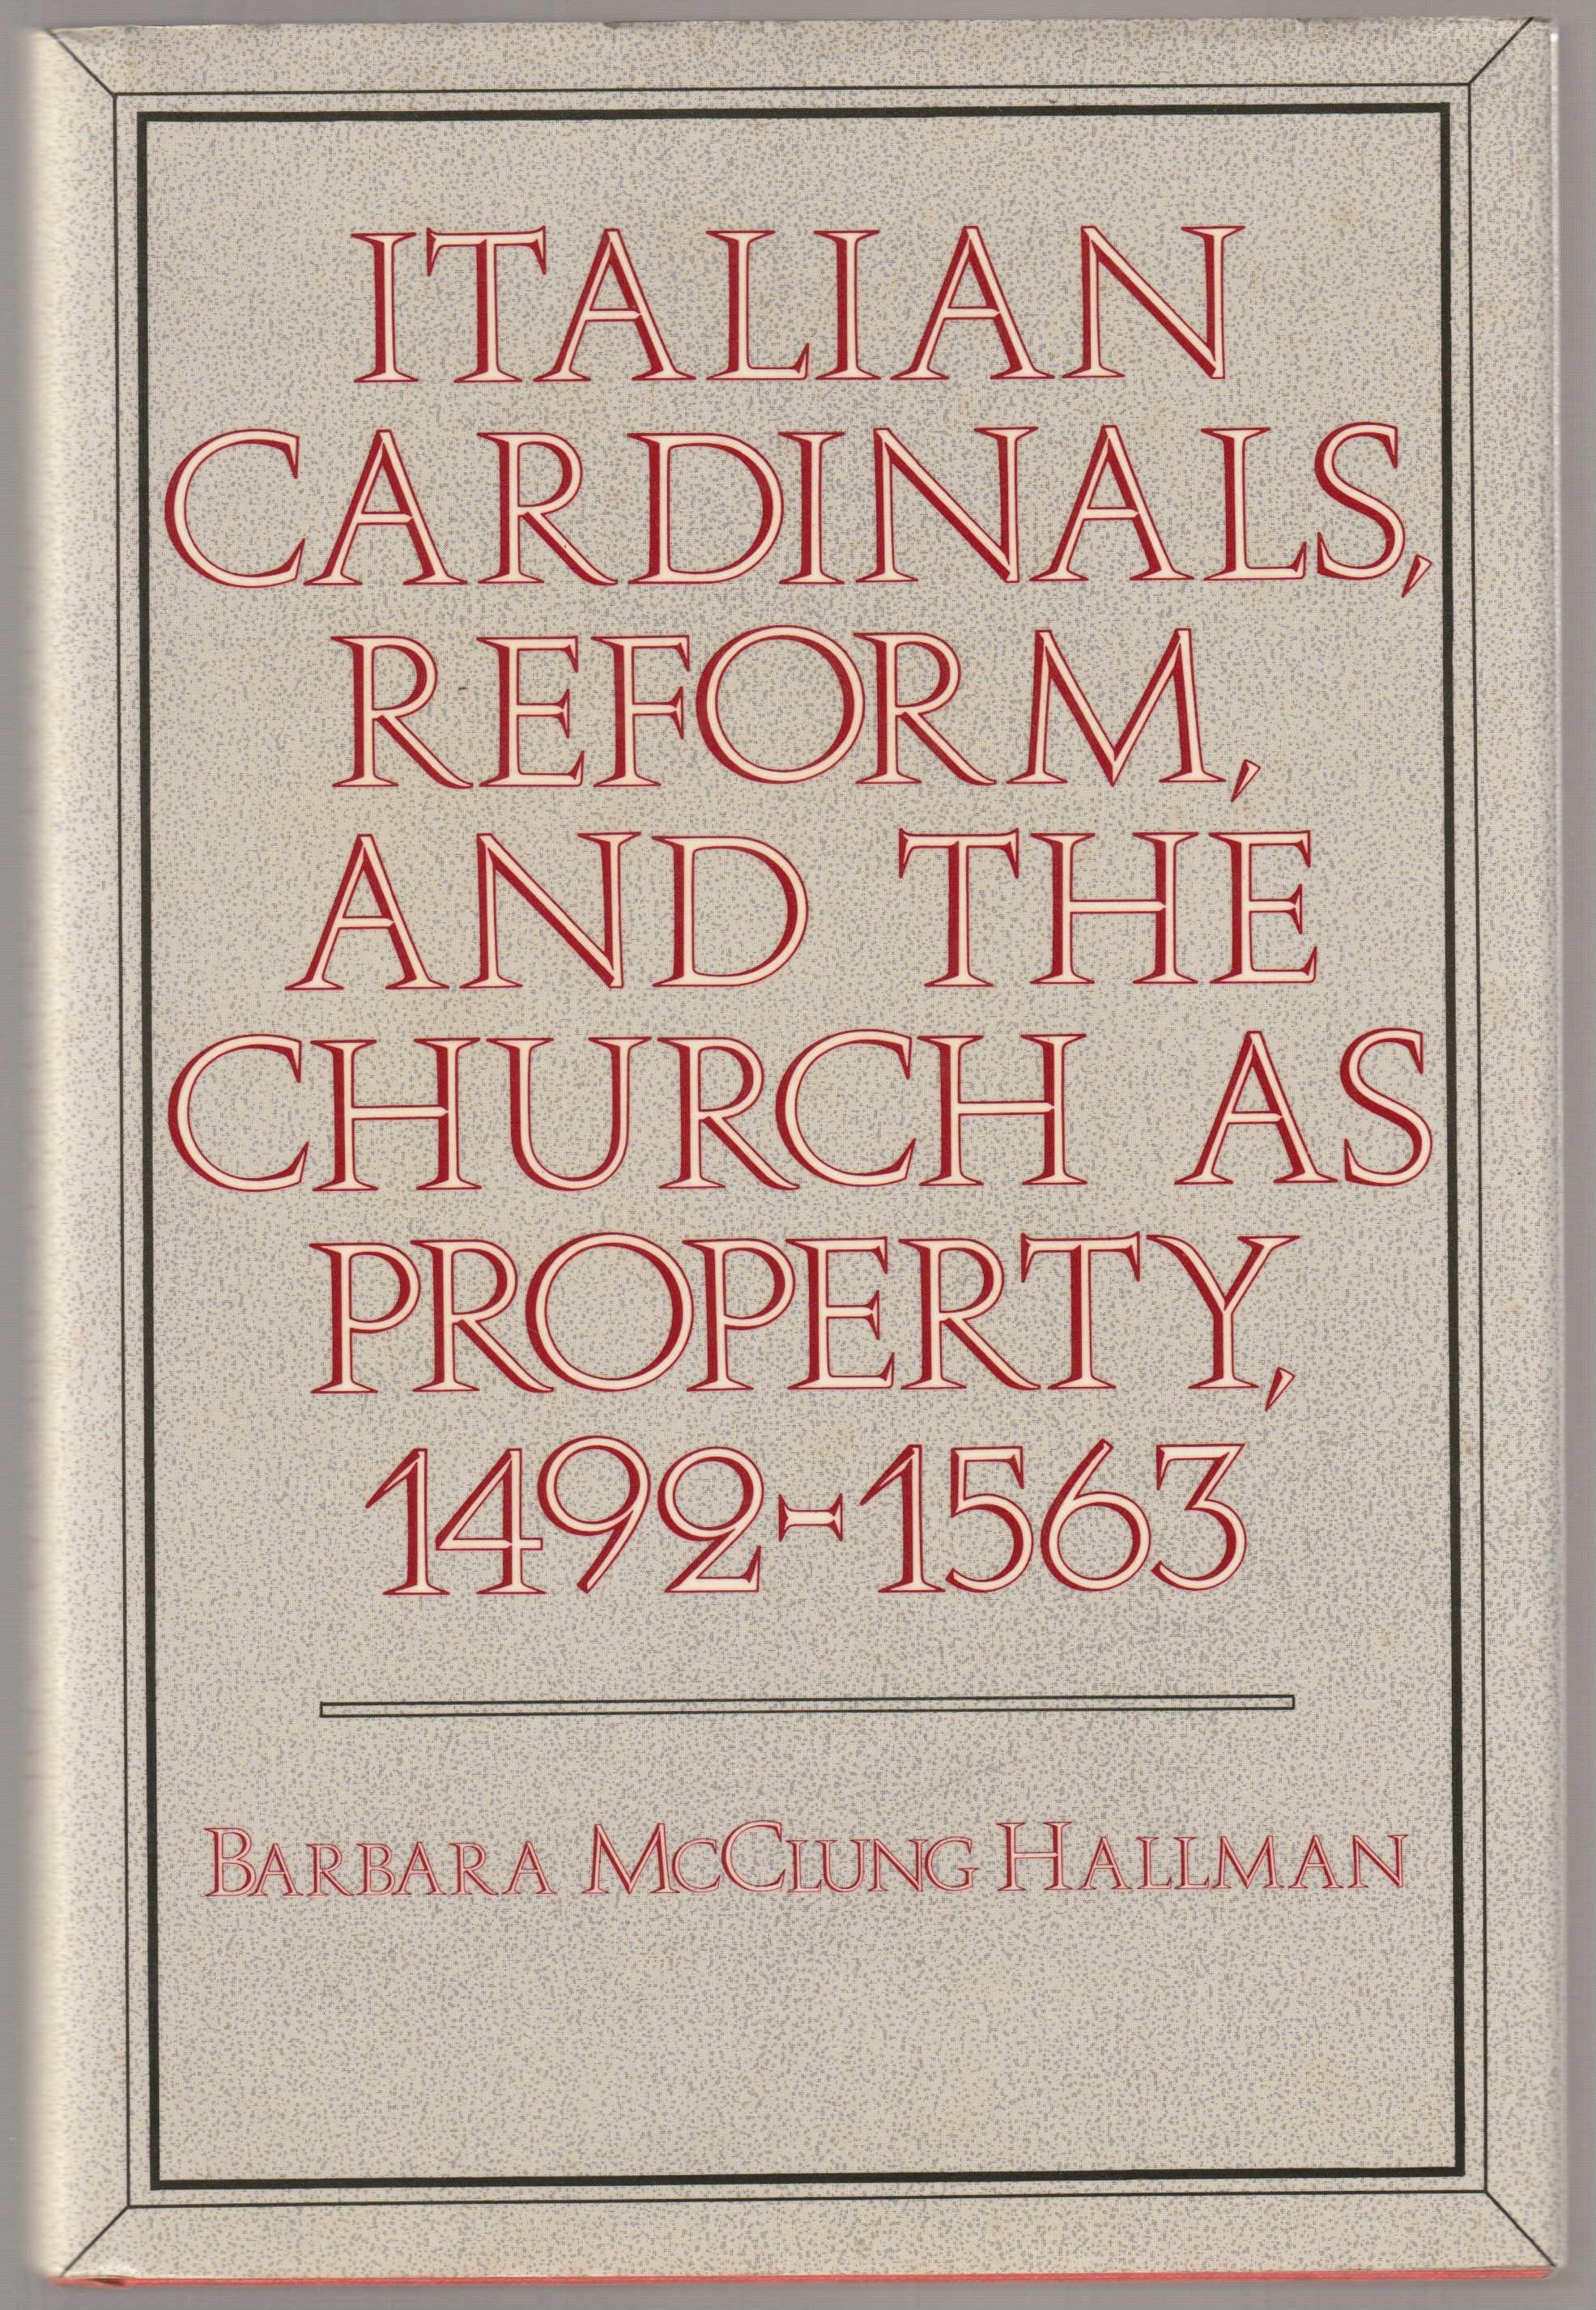 Italian cardinals, reform, and the church as property.